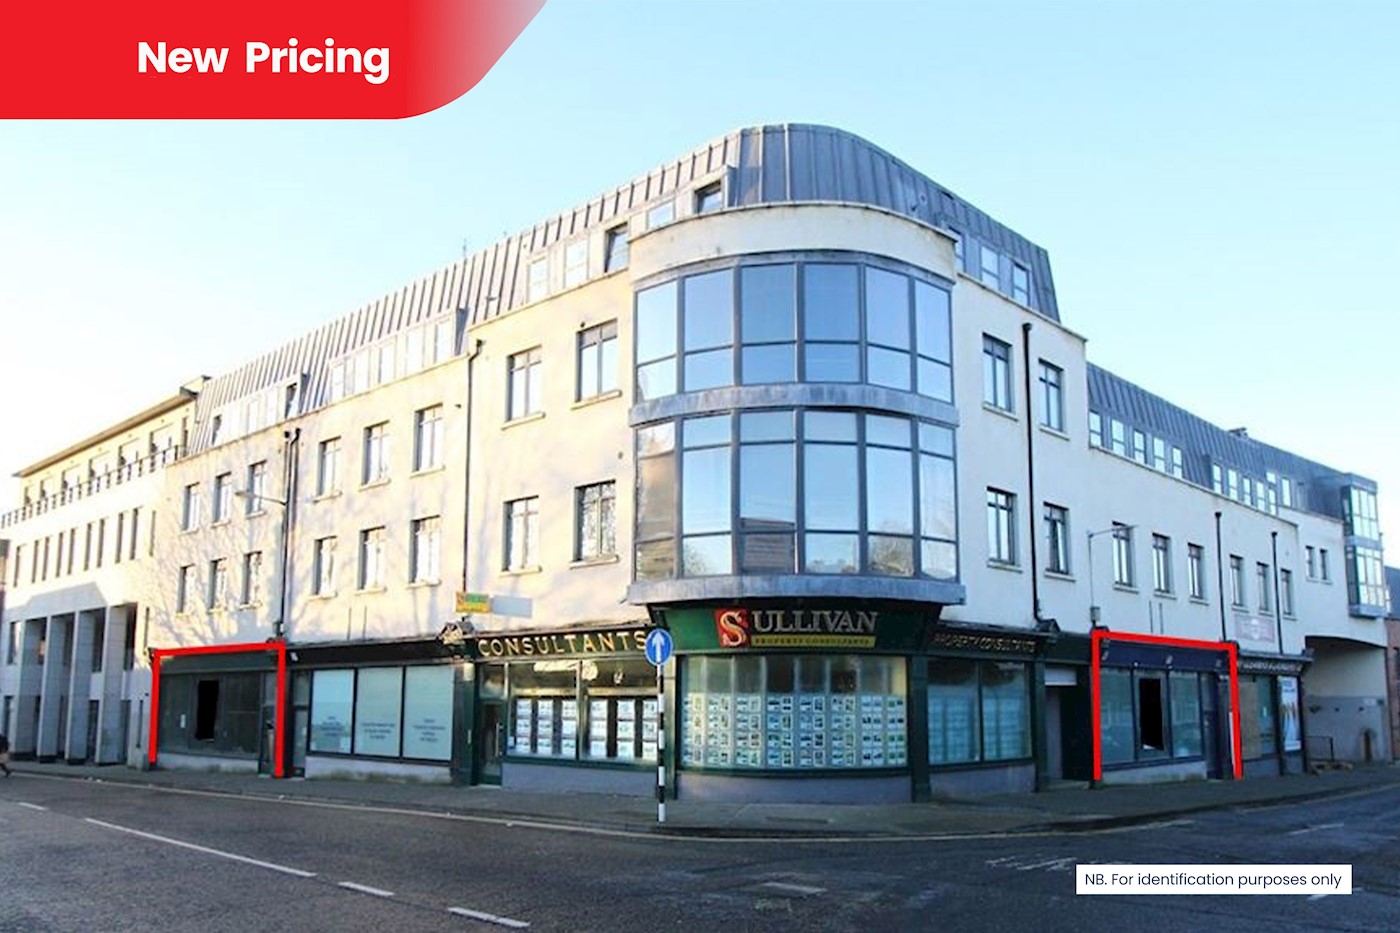 Retail and Office Unit, An tSean Mhargagh, Greenlanes, Drogheda, Co. Louth 1/12